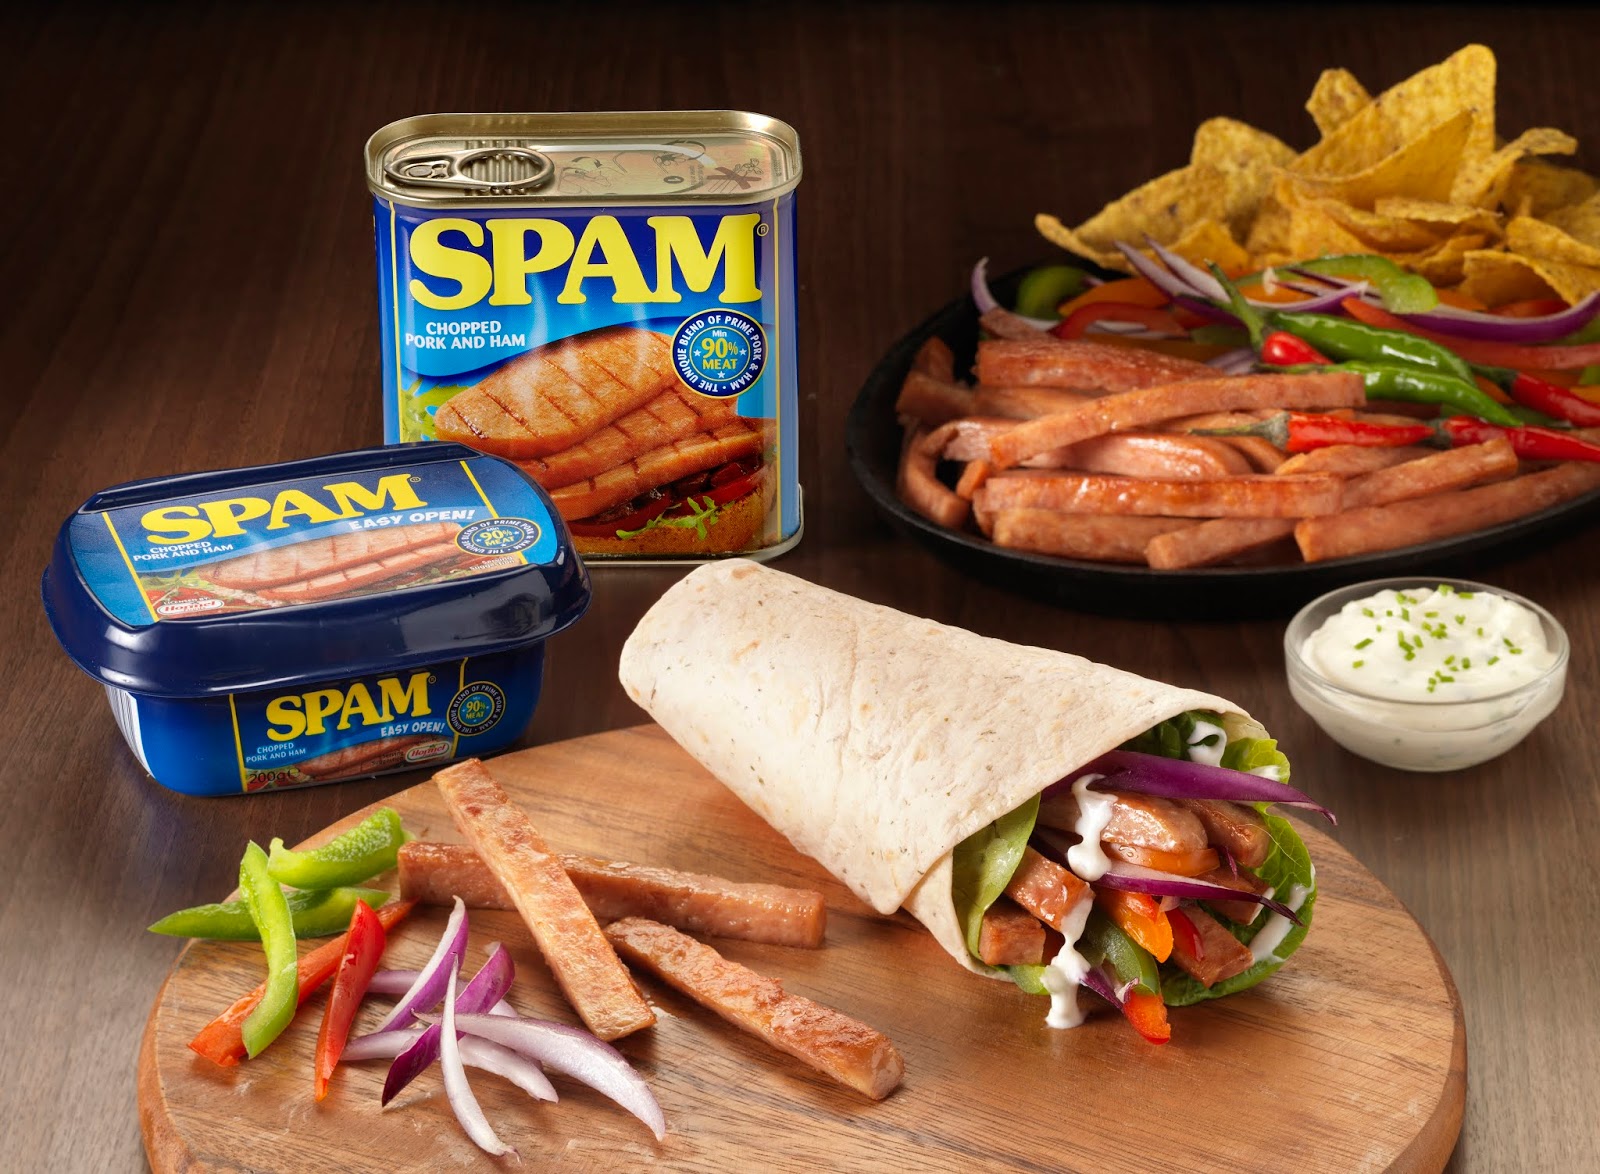 Heavy Duty Slicer Cut Spam Meat in Perfect Slices - Westmark Made in German  